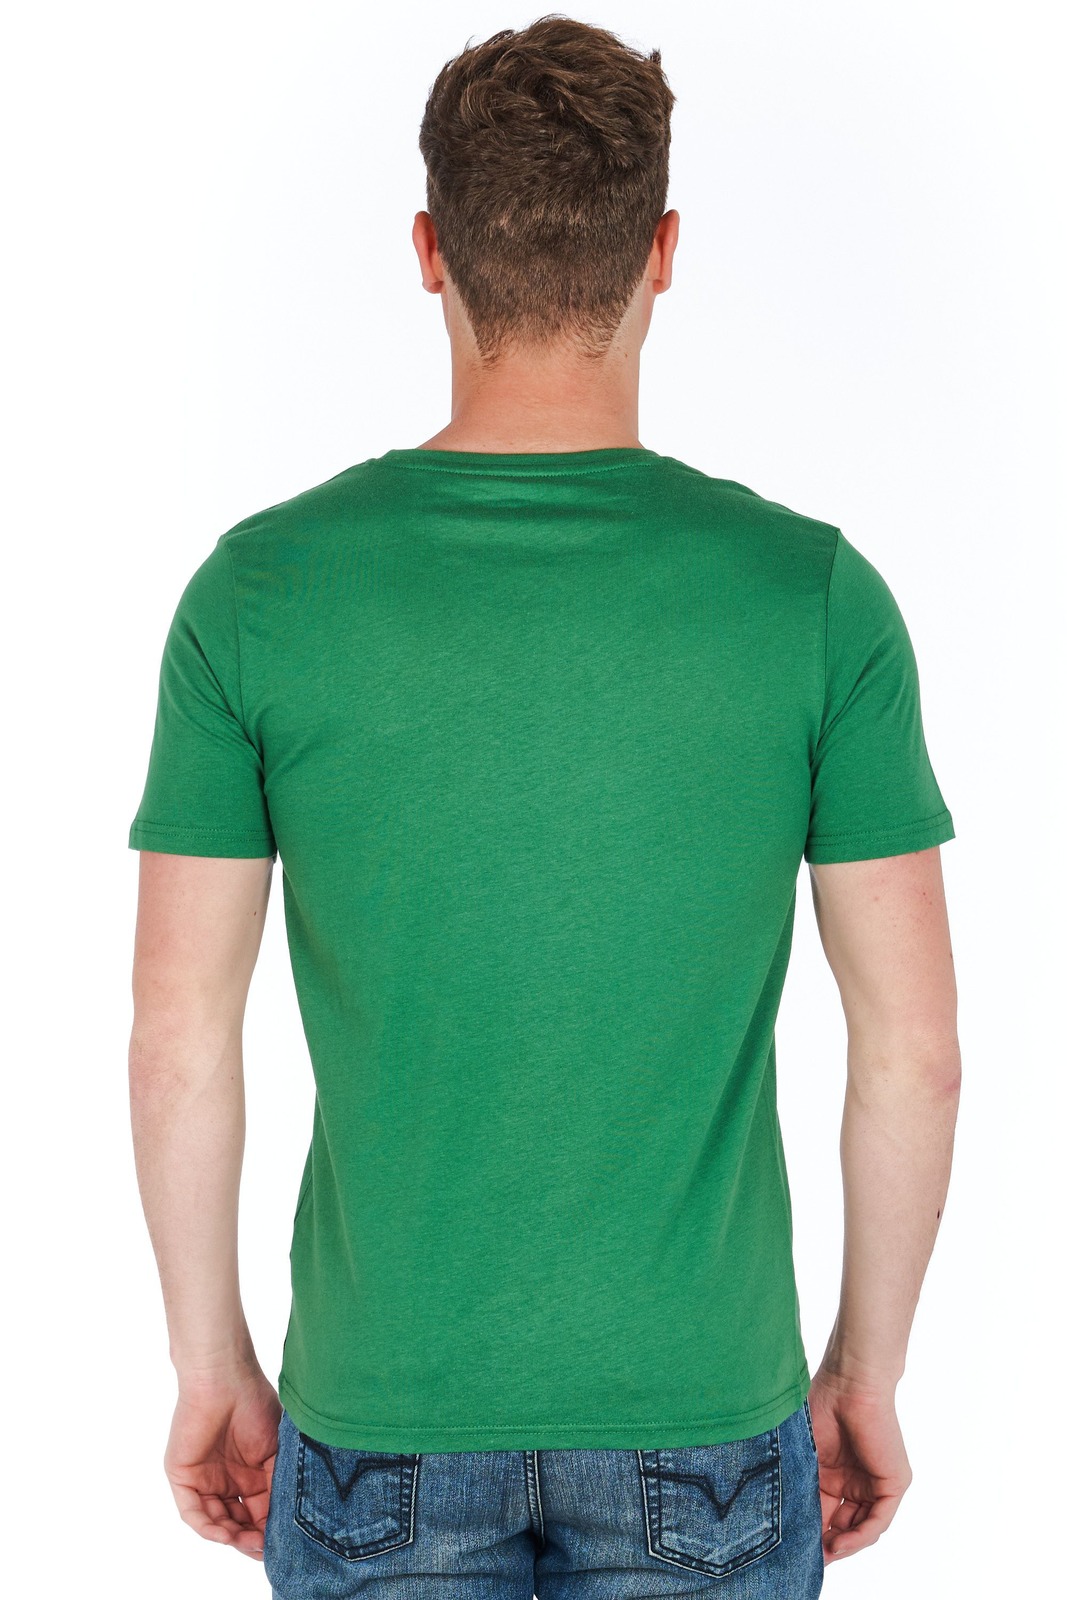 Jeckerson Green T-shirts for Men - ORDINARY